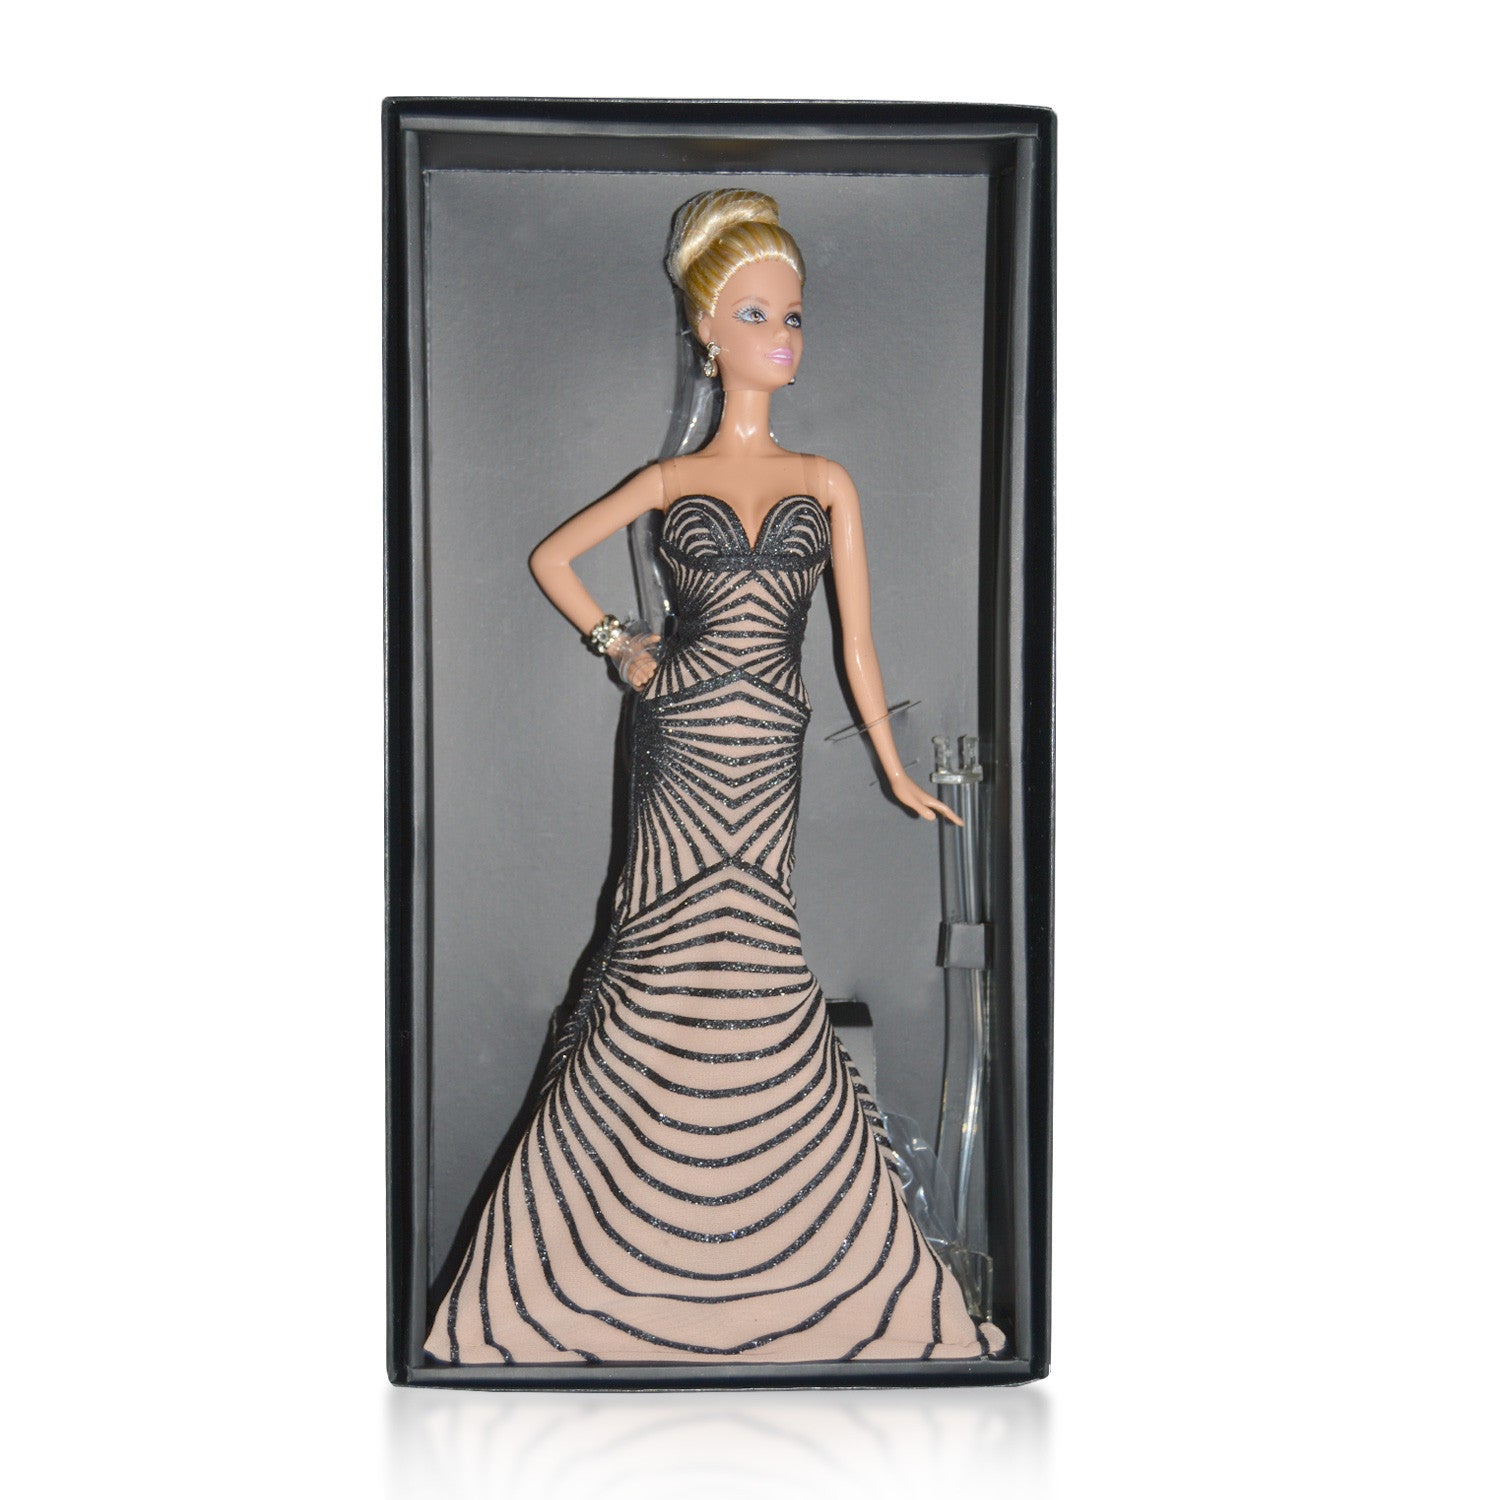 Shop authentic Zuhair Murad Barbie Doll at revogue for just USD 509.00